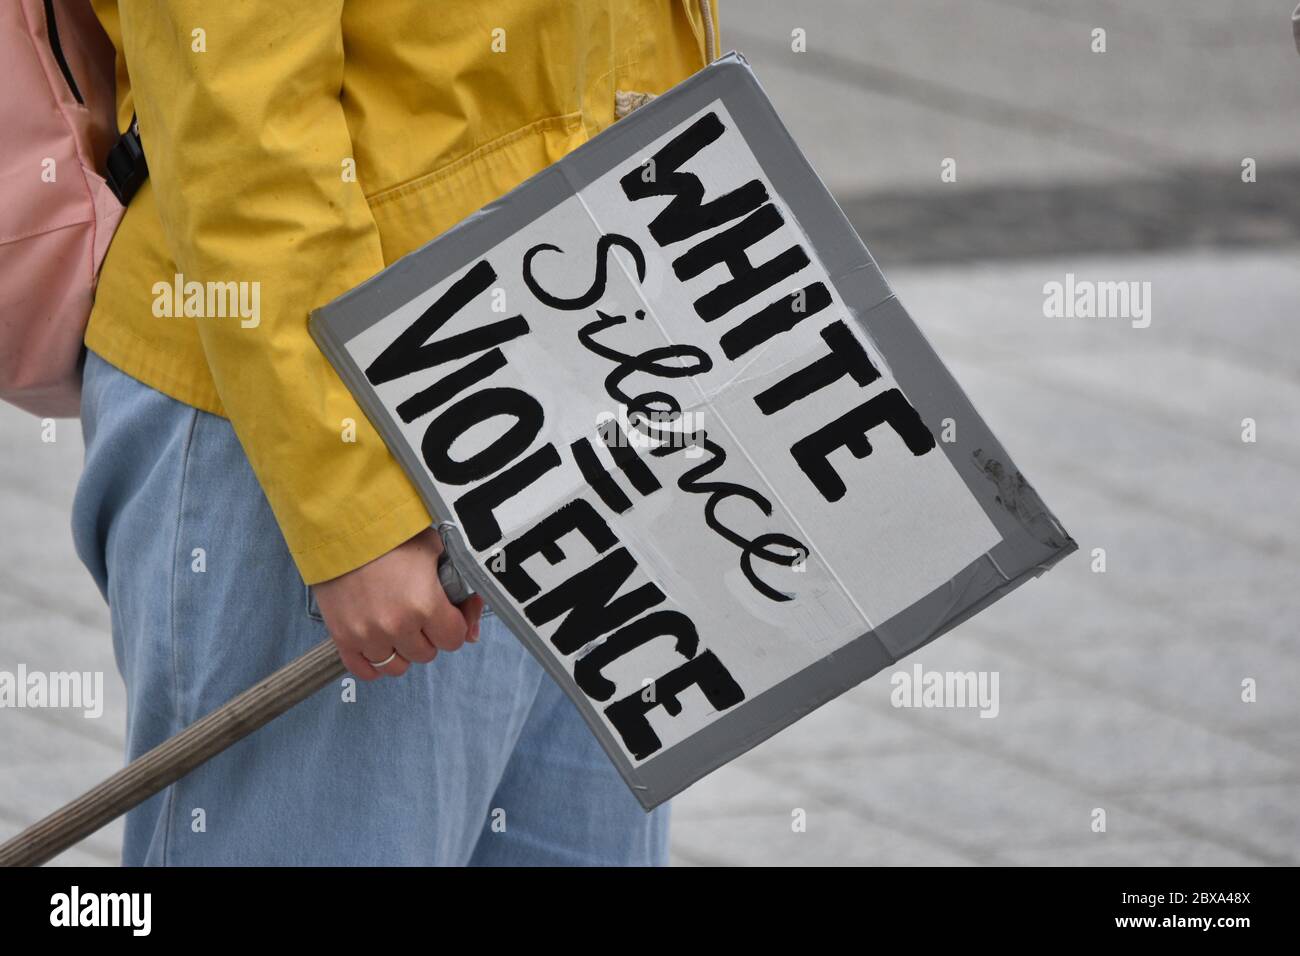 A young caucasian woman protests at a British anti racism rally in the UK holding a sign that reads 'White Silence Equals Violence'' Stock Photo